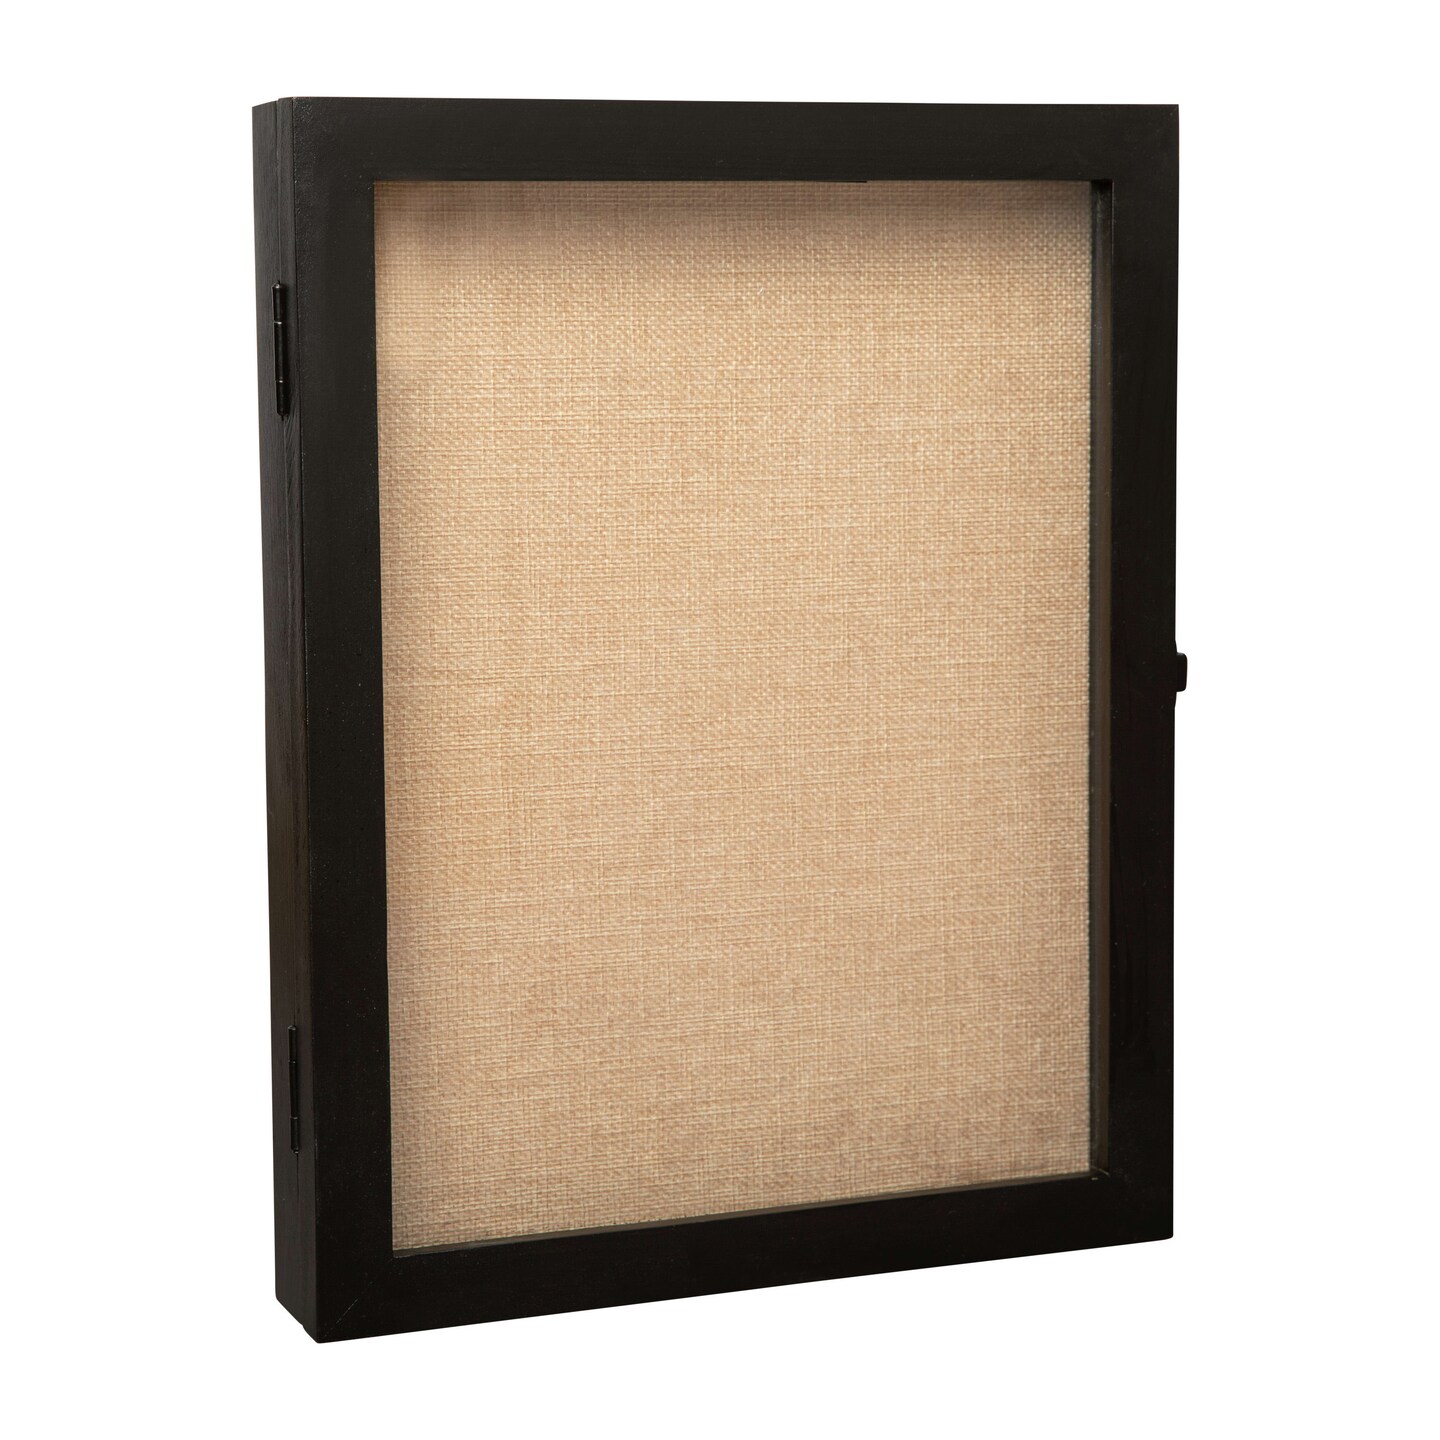 HBCY Creations Wood Shadow Box Display Case - Solid Wood with Acrylic Window - Security Latch - For Mementos and Keepsakes